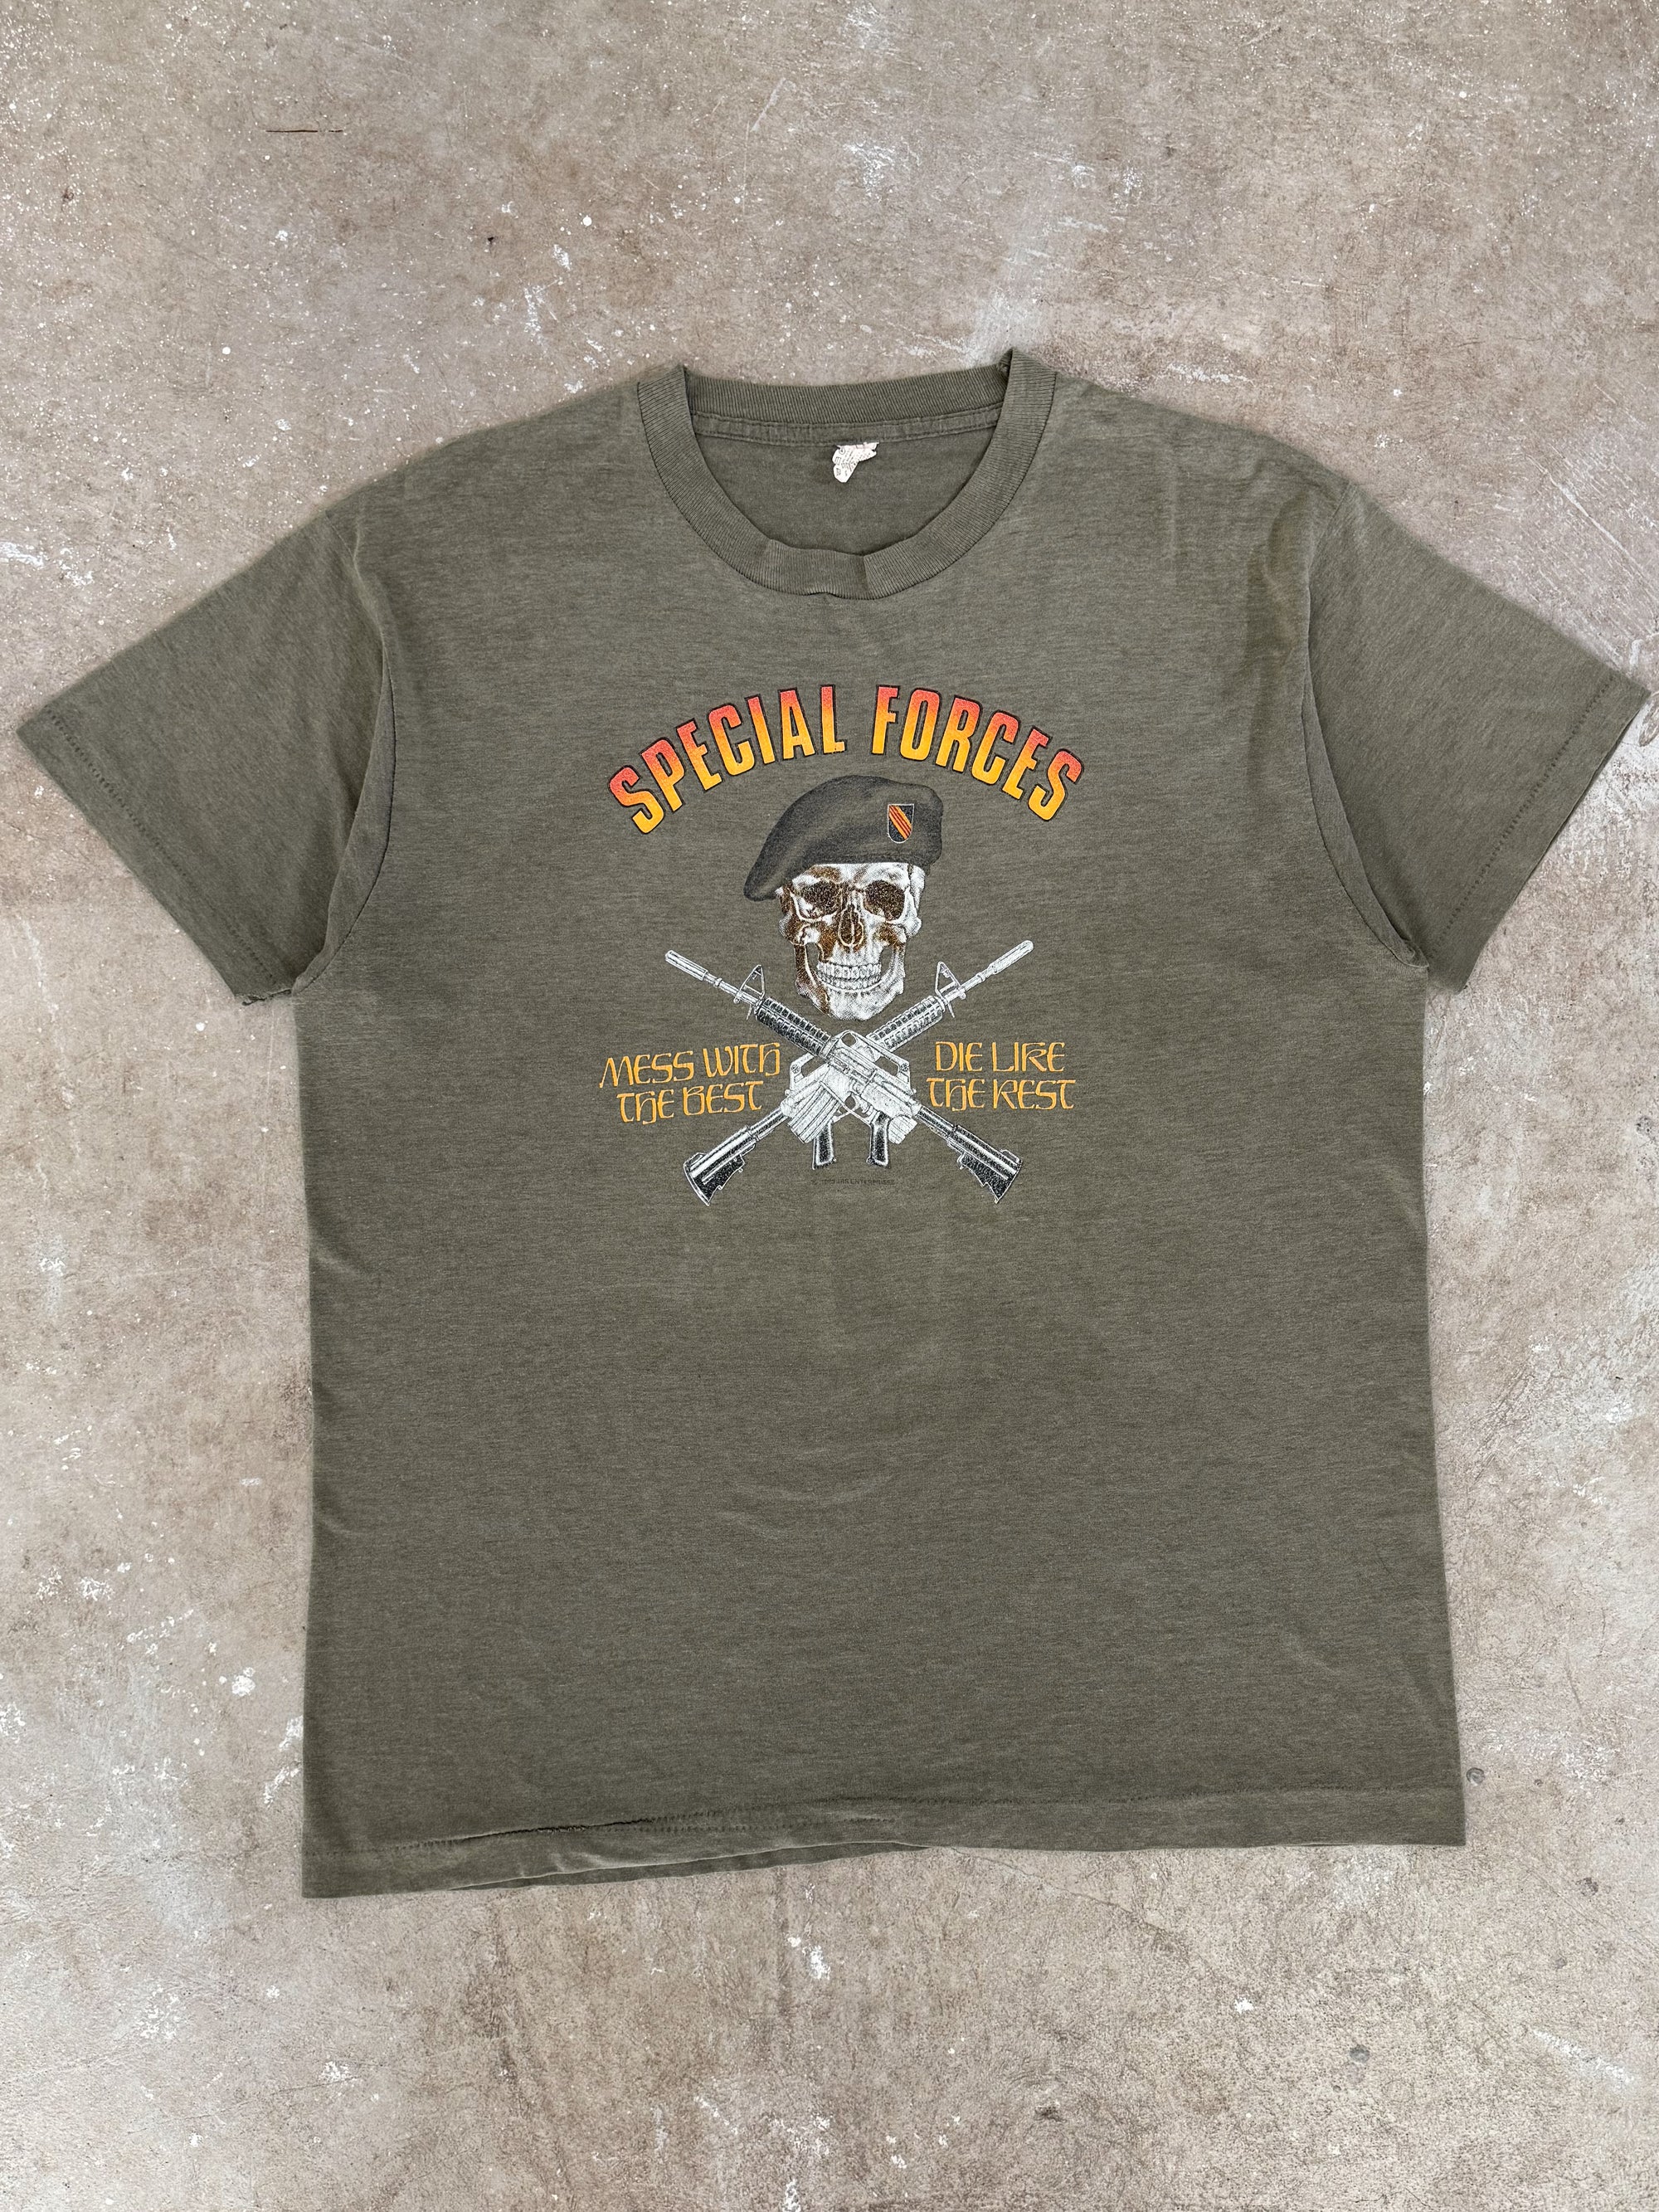 1980s "Special Forces" Tee (M/L)